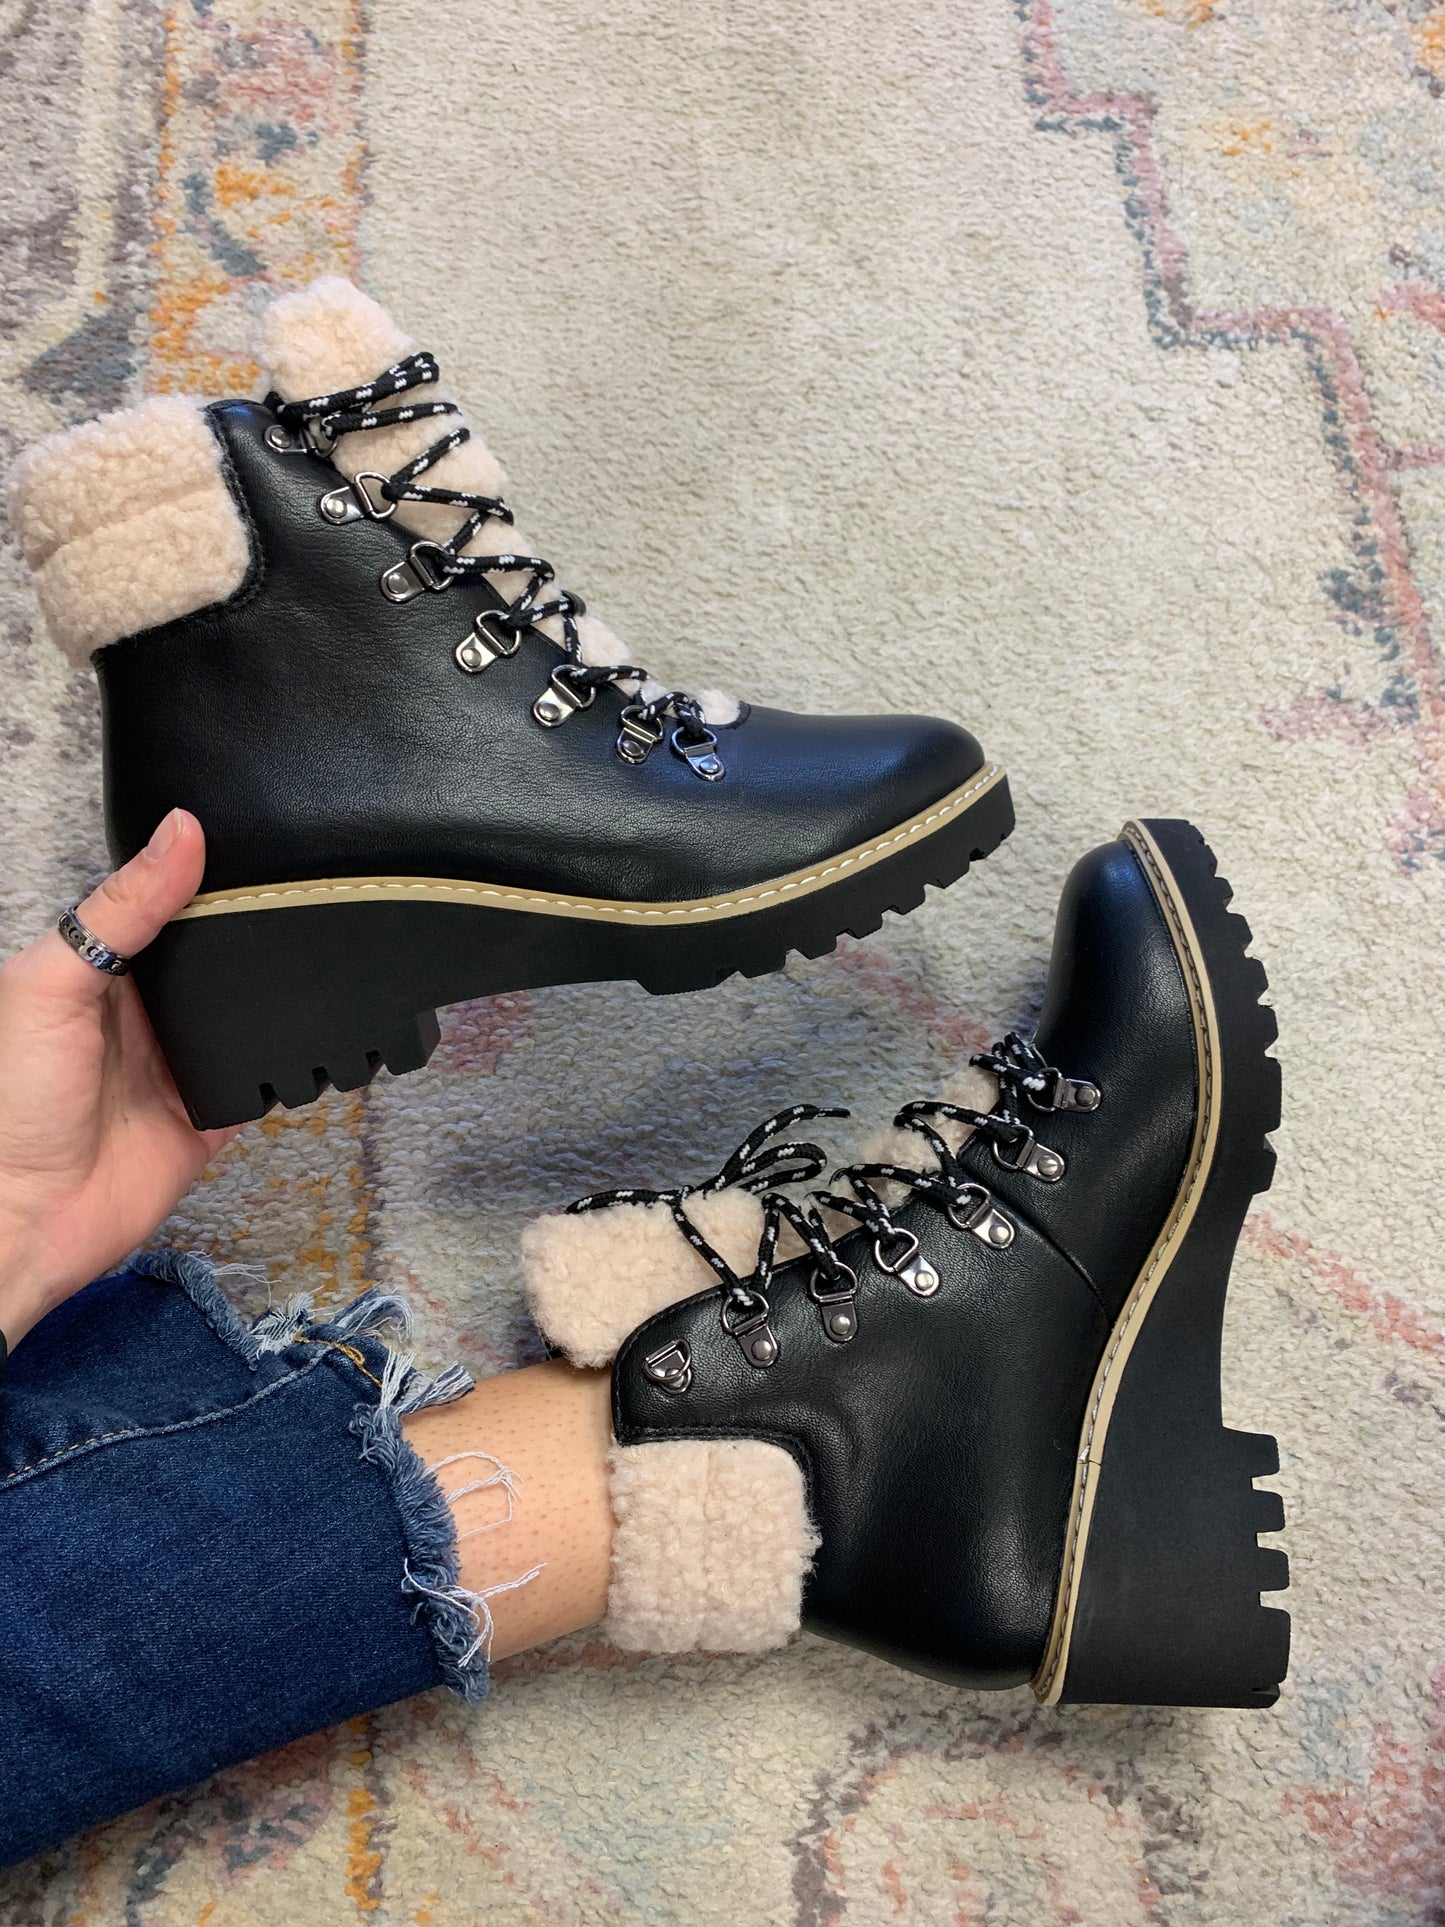 Squad Boots - Smooth Black